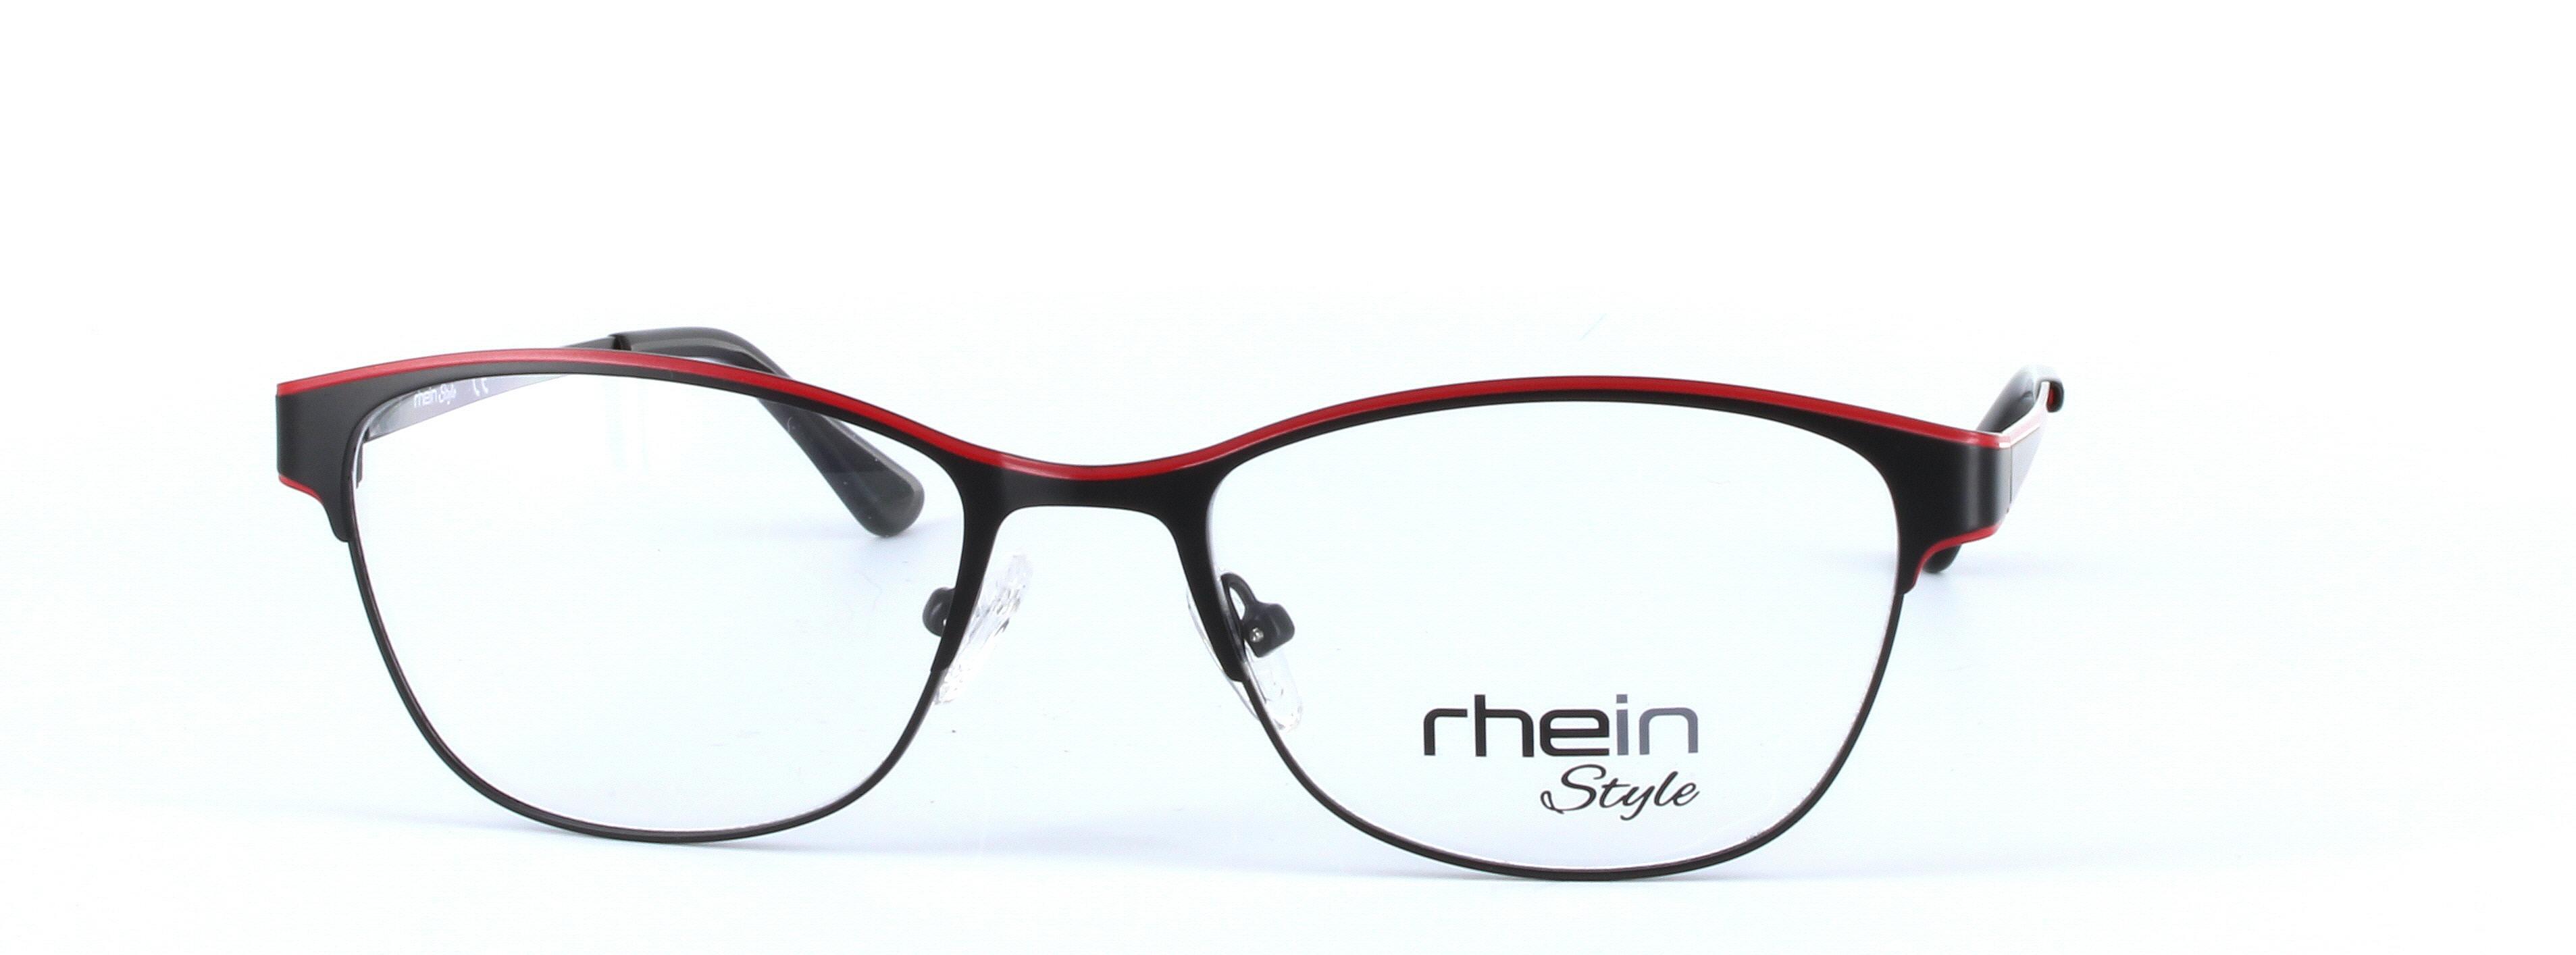 Harvey Black and Red Full Rim Oval Metal Glasses - Image View 5